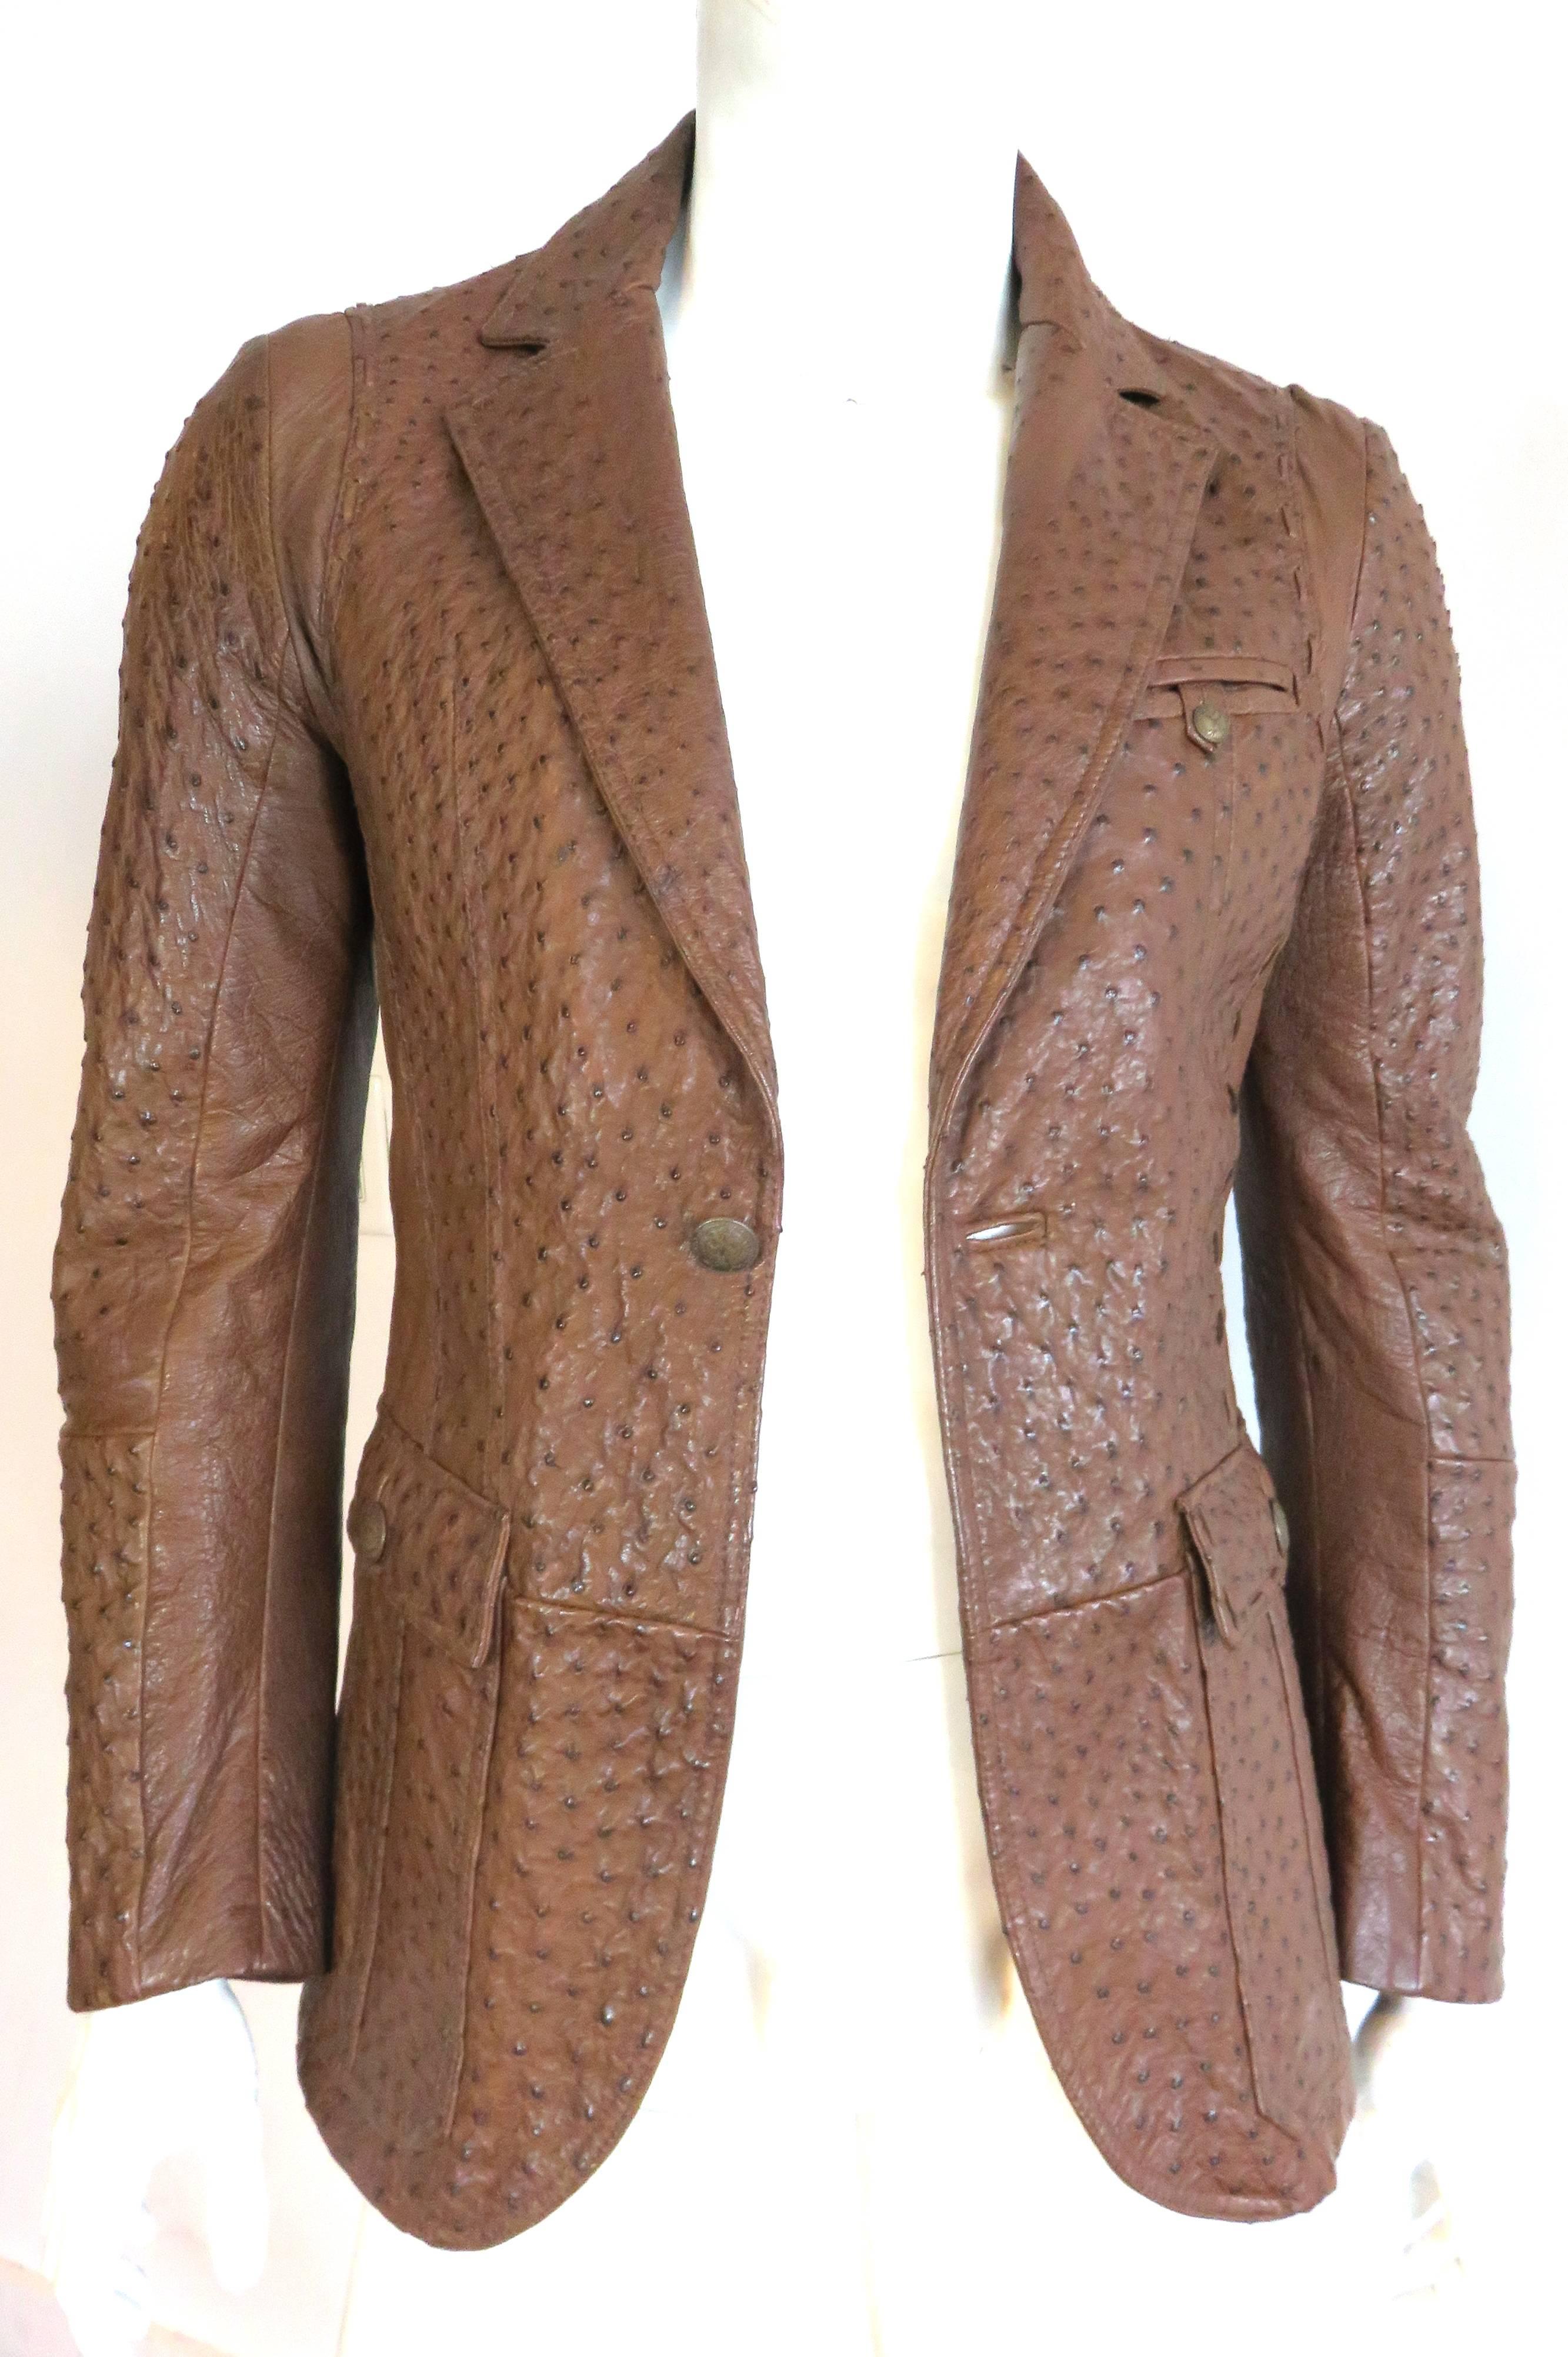 Luxurious, ROBERTO CAVALLI Men's cognac ostrich skin leather blazer jacket.

Genuine, full-quill ostrich skin leather jacket with seamed panel construction.

Leather lacing, stitch detailing around top of armholes, and down side seam